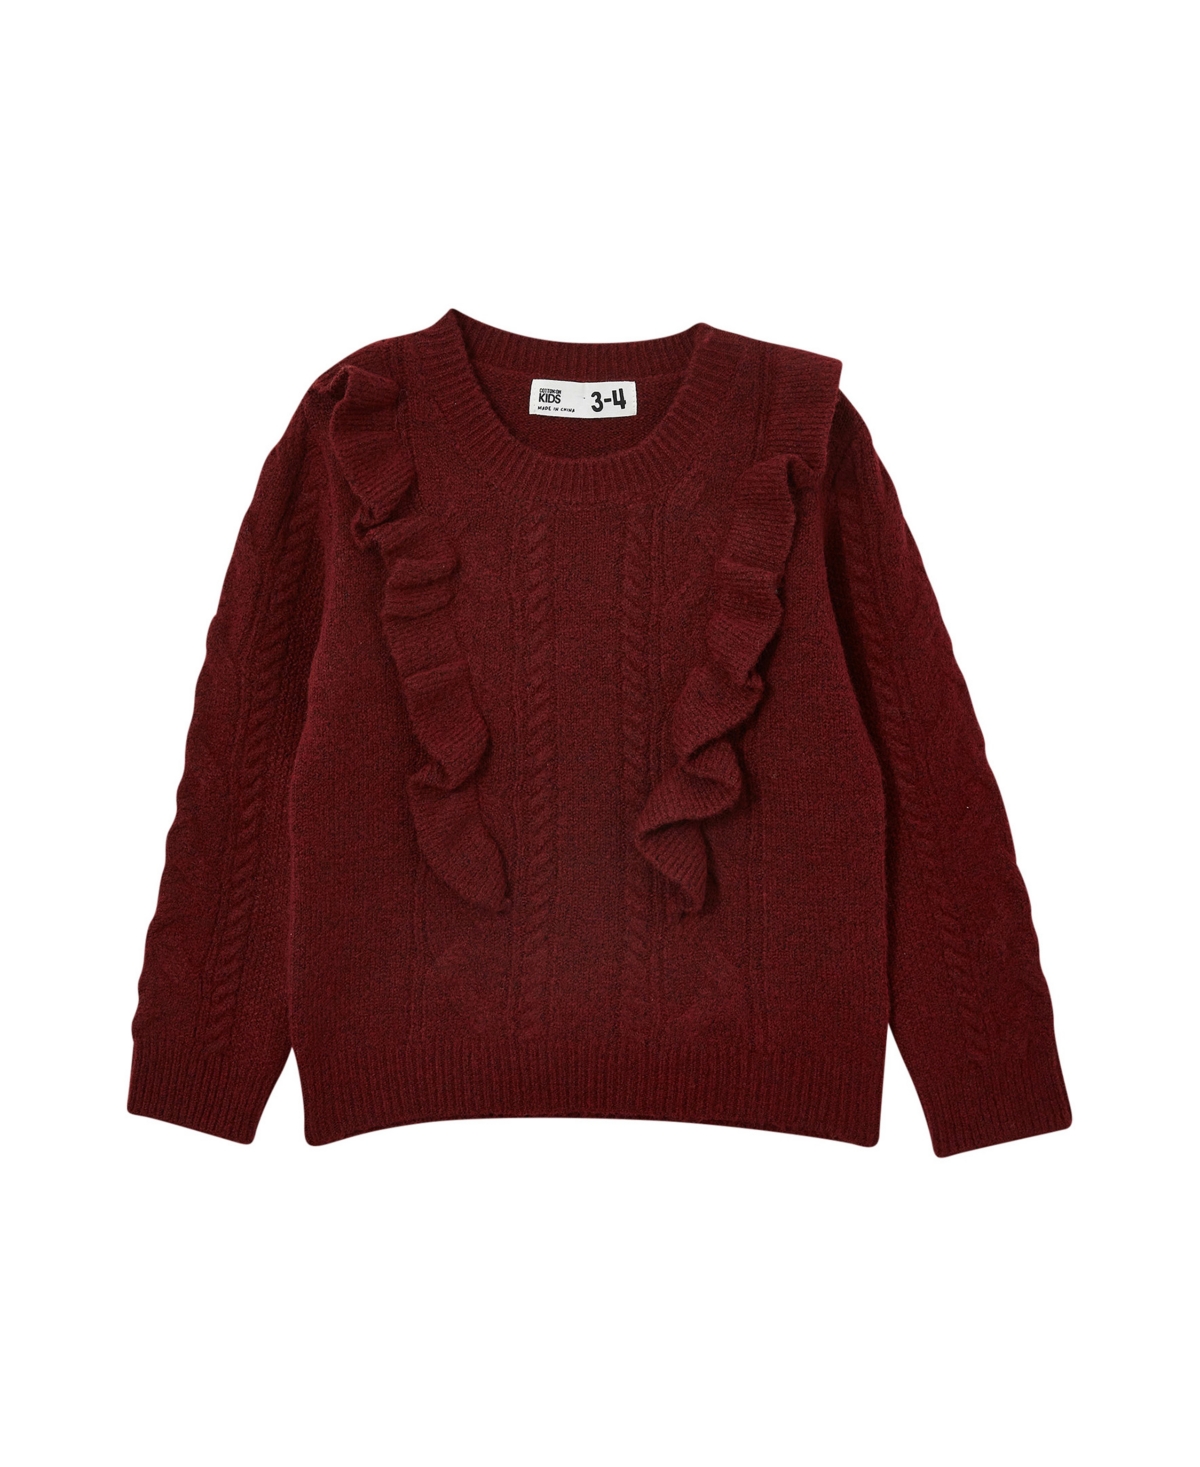 Cotton On Babies' Toddler Girls Lisa Sweater In Crushed Berry Marle